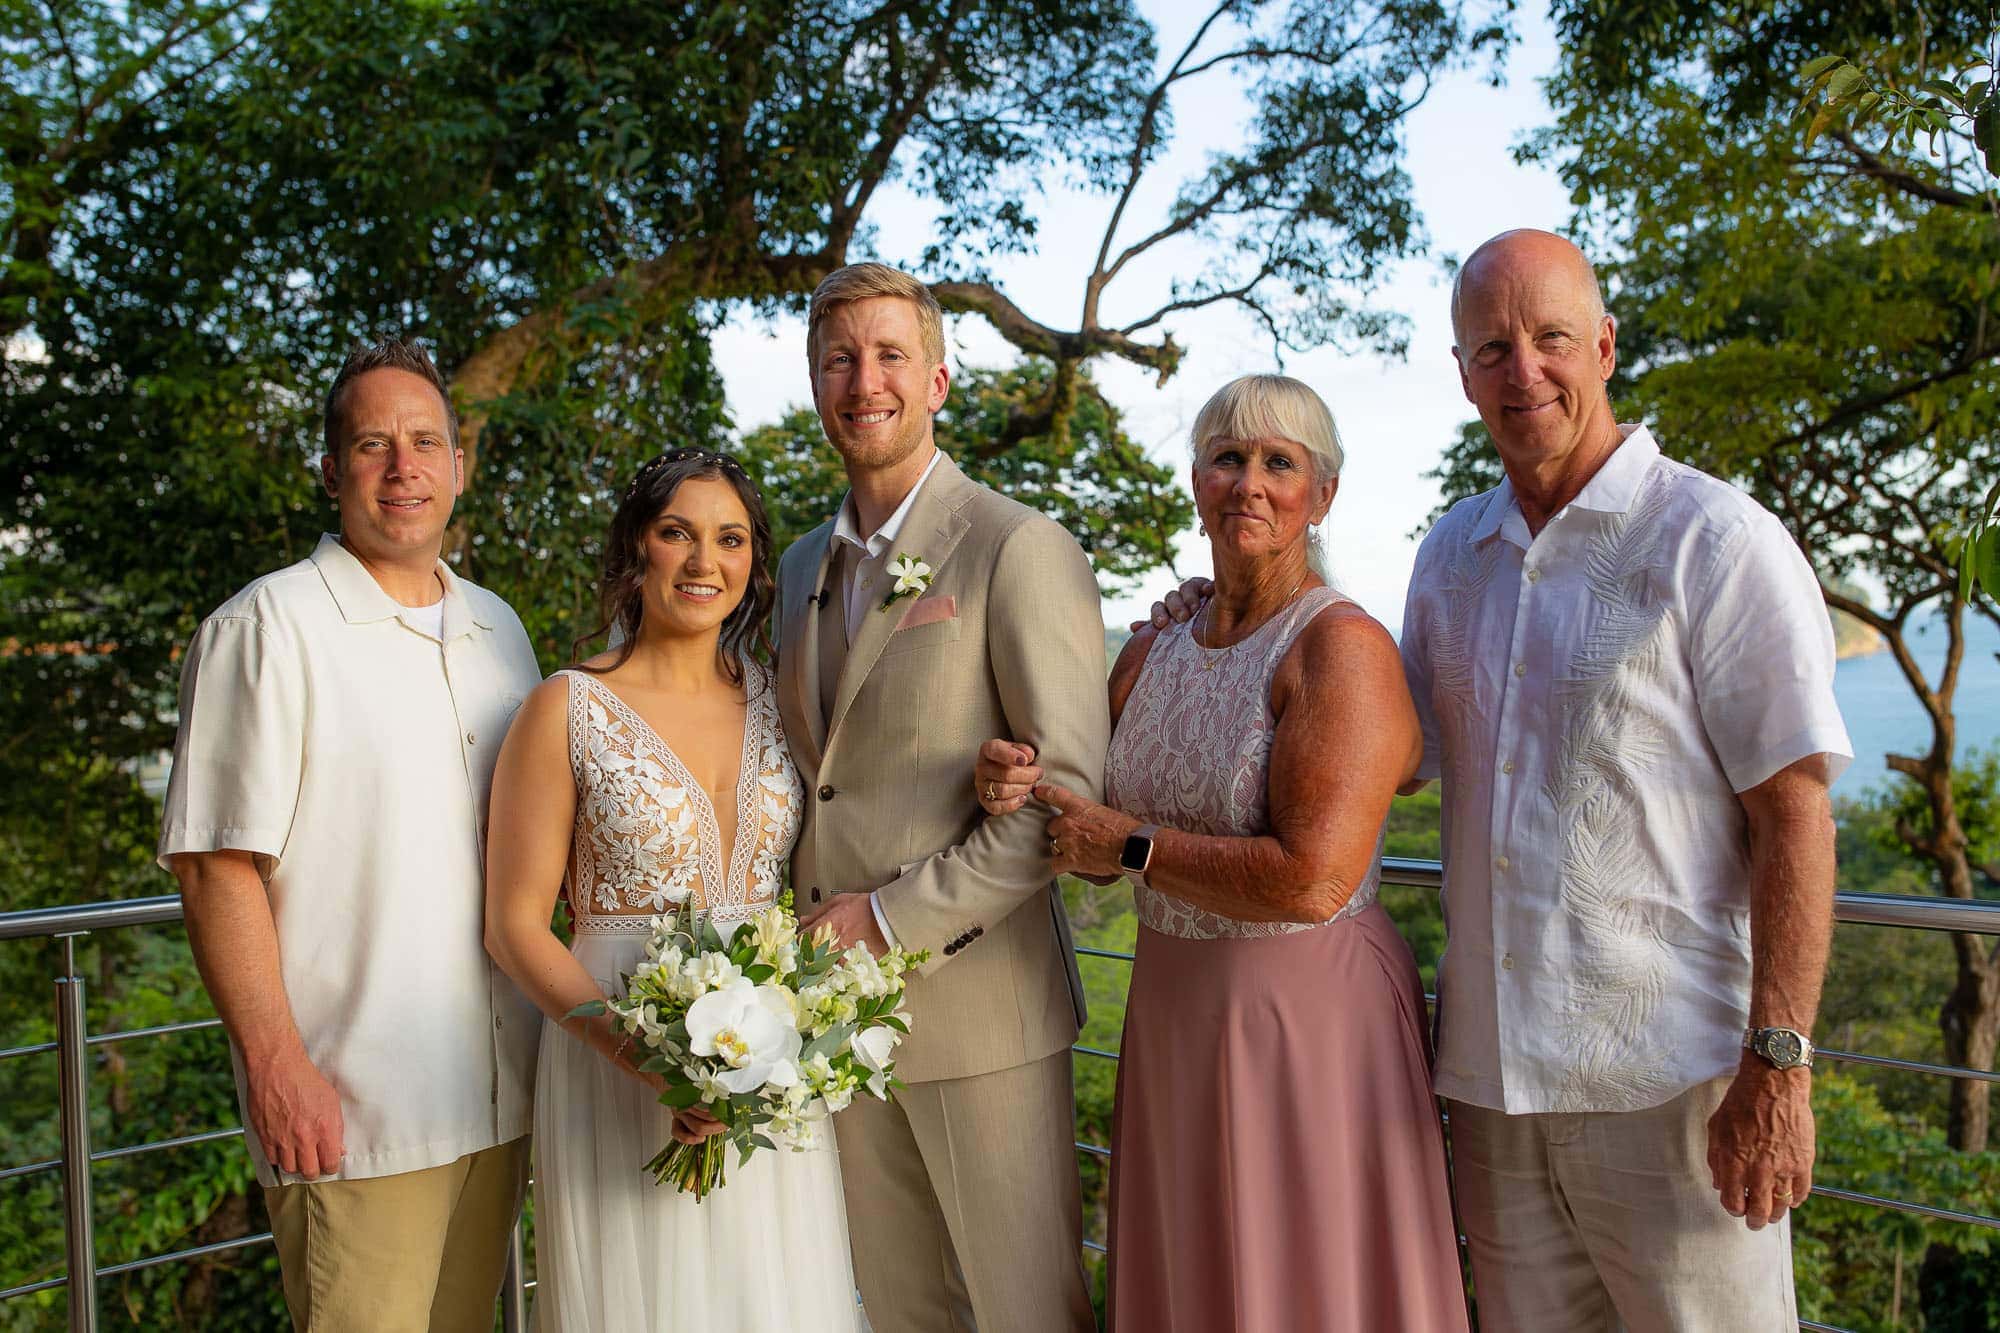 The bride and groom with their parents